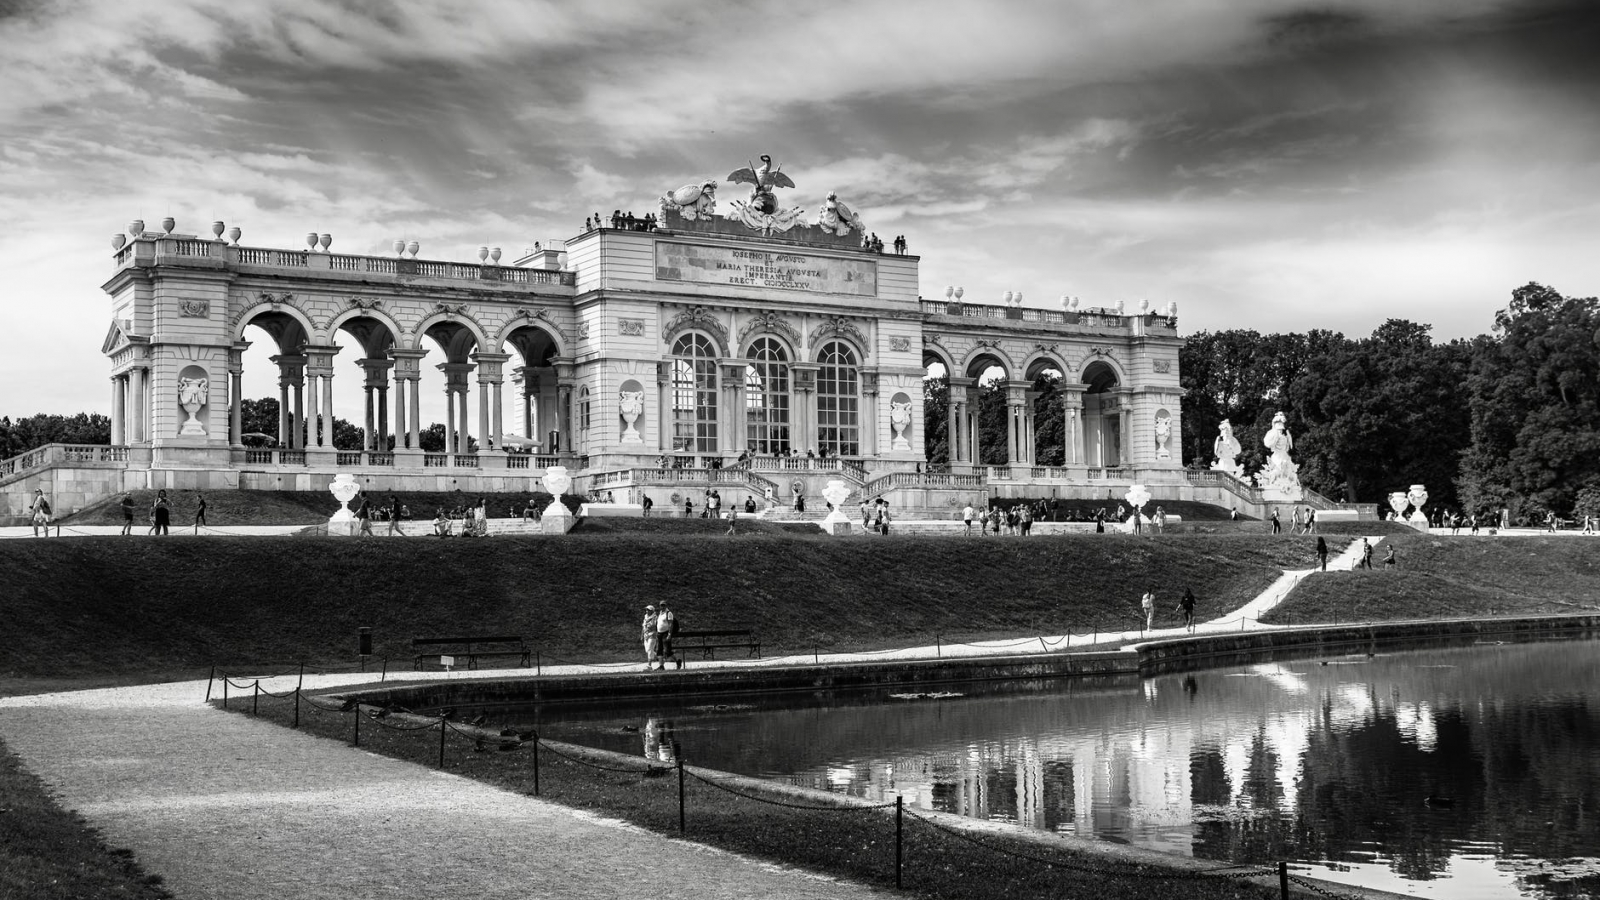 greyscale photography of schonbrunn palace